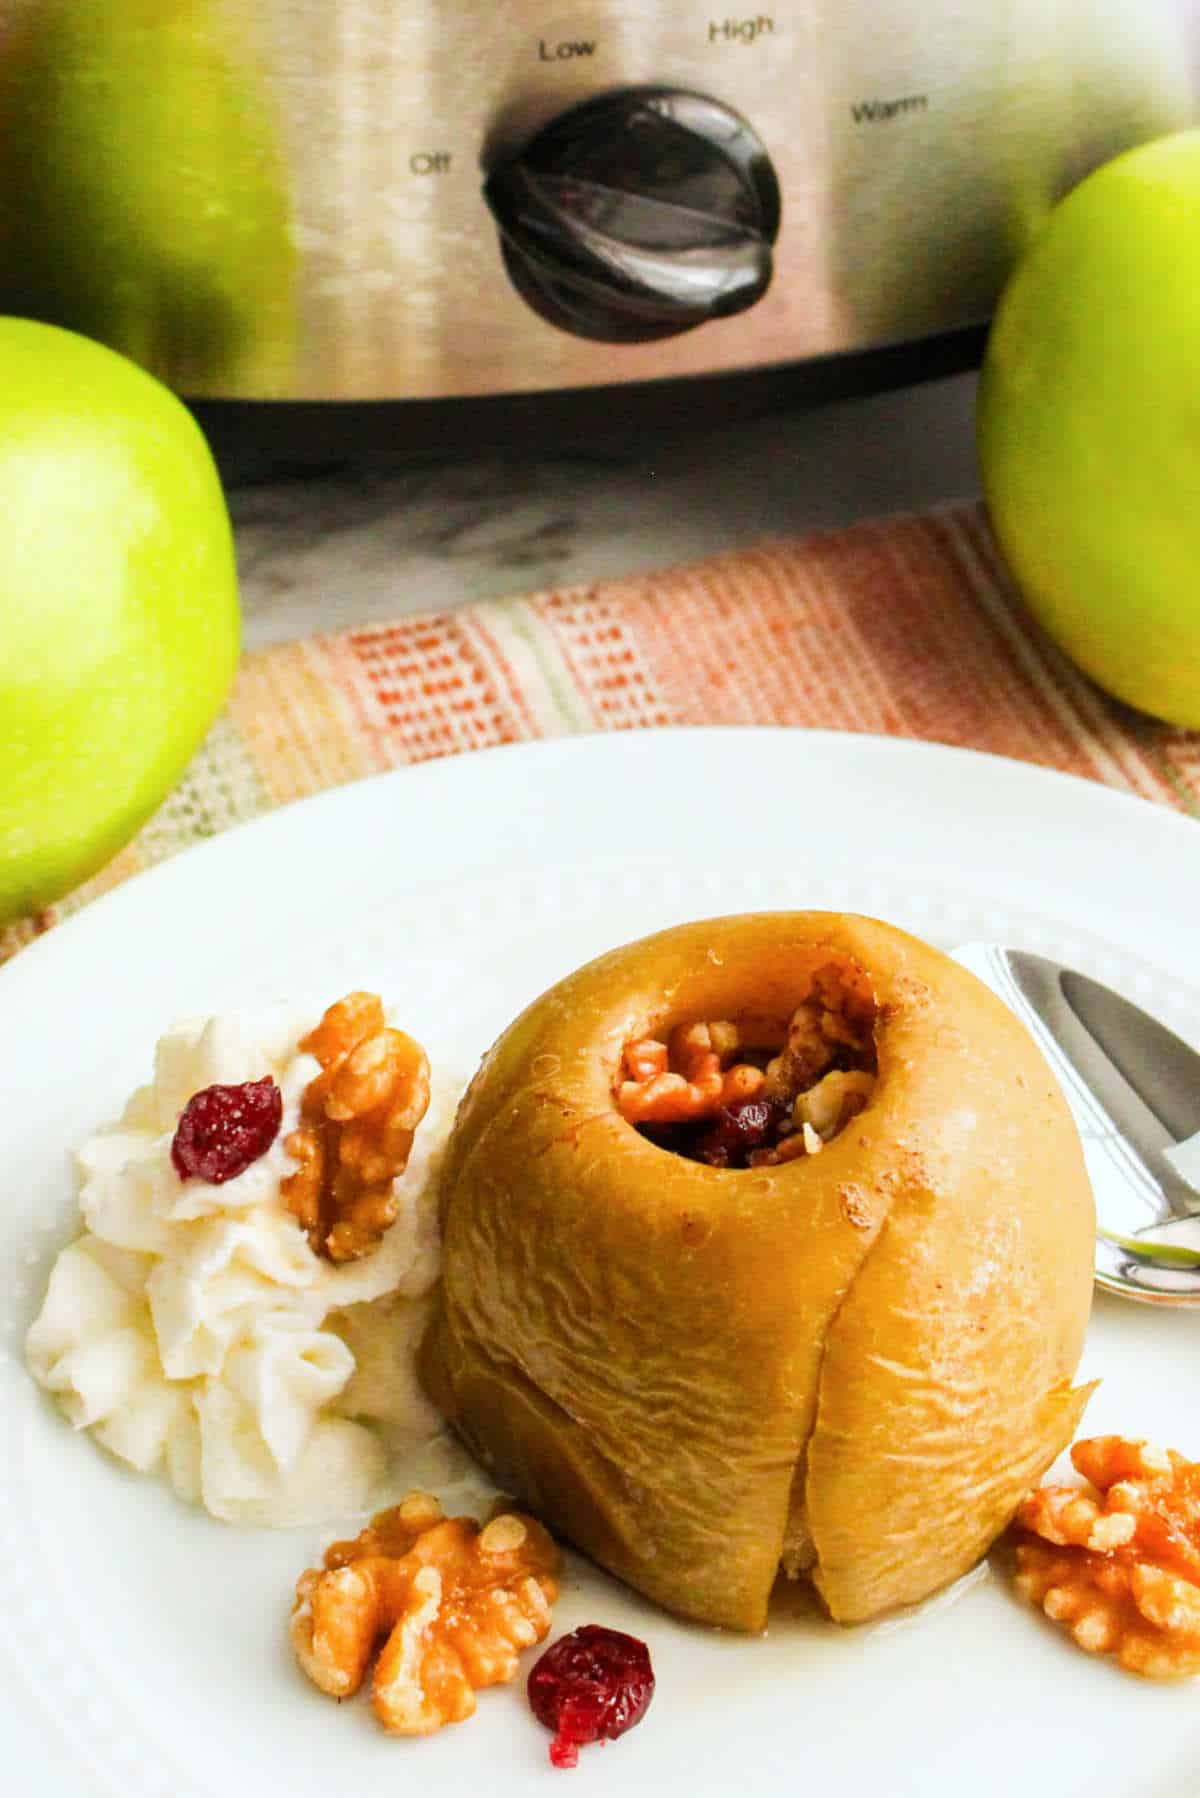 baked apples with walnuts and cranberries.